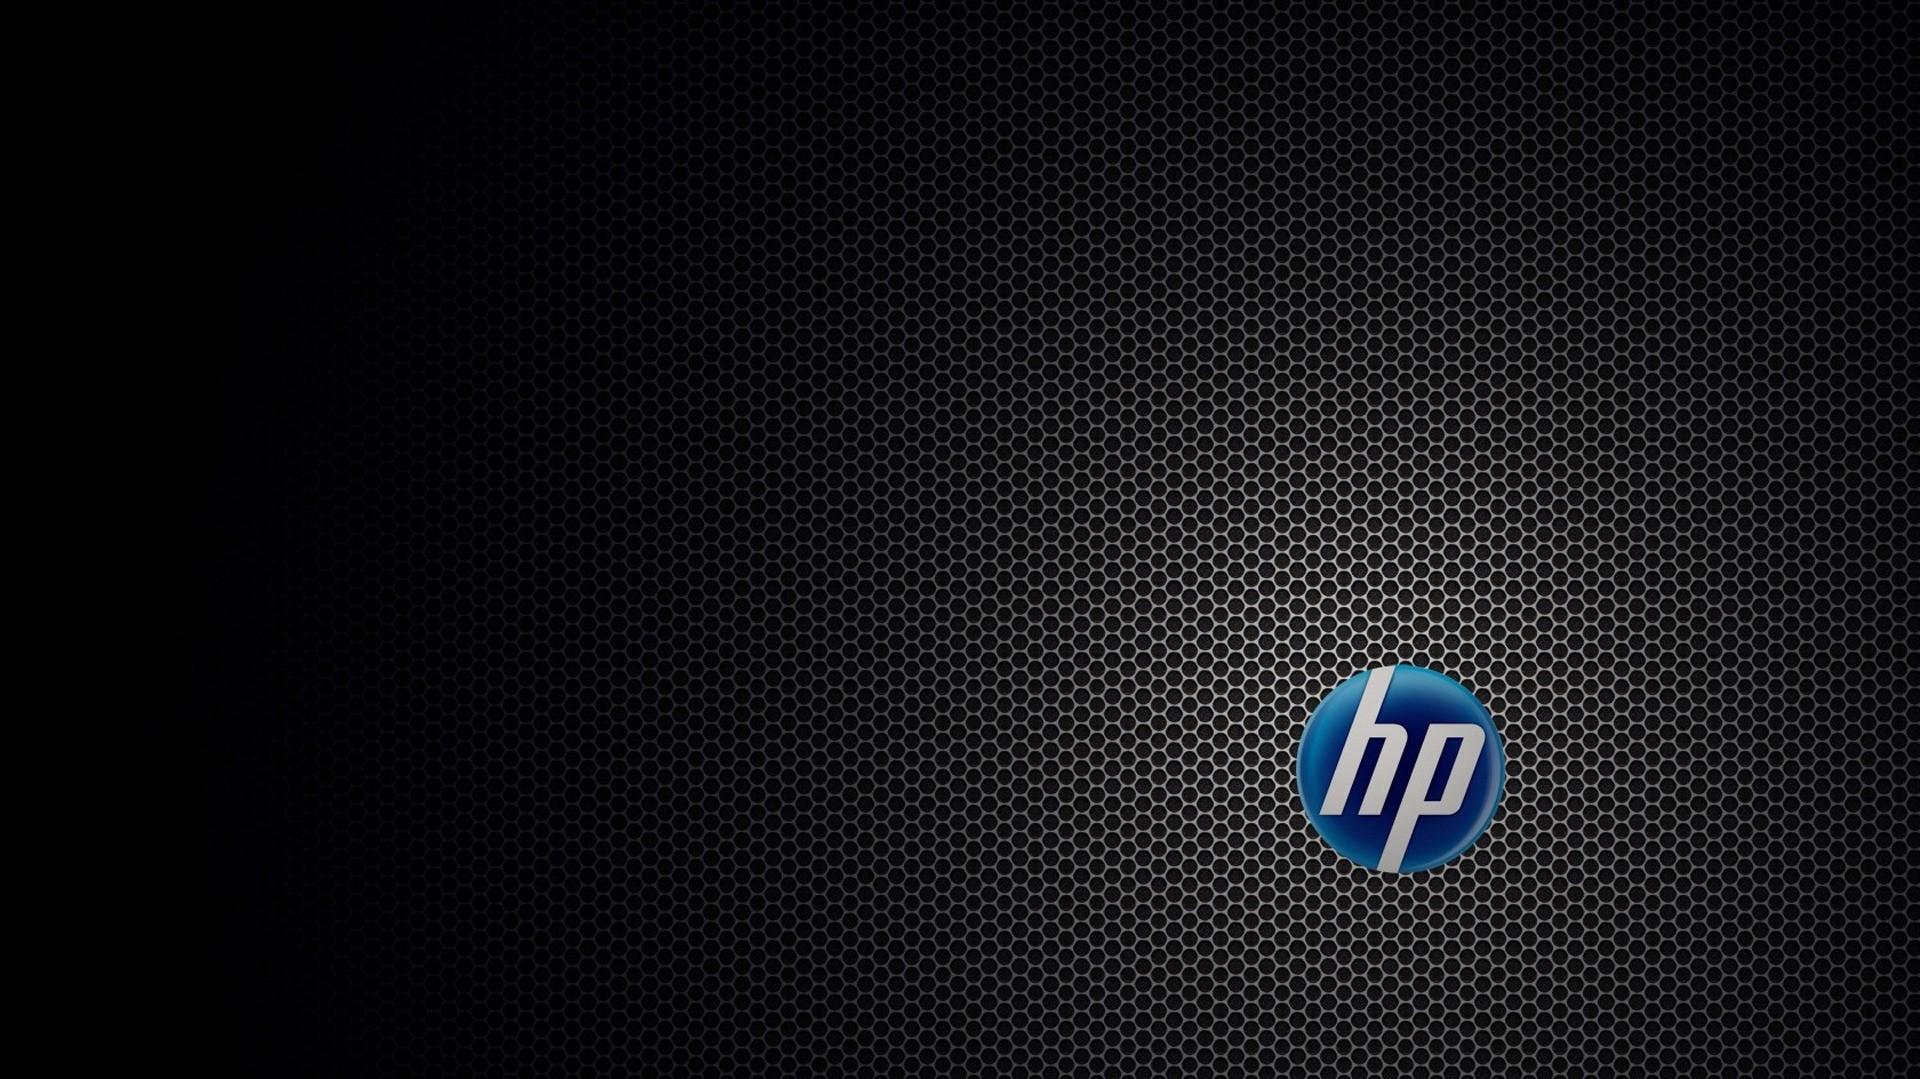 Hp Pavilion Wallpaper Image For Your